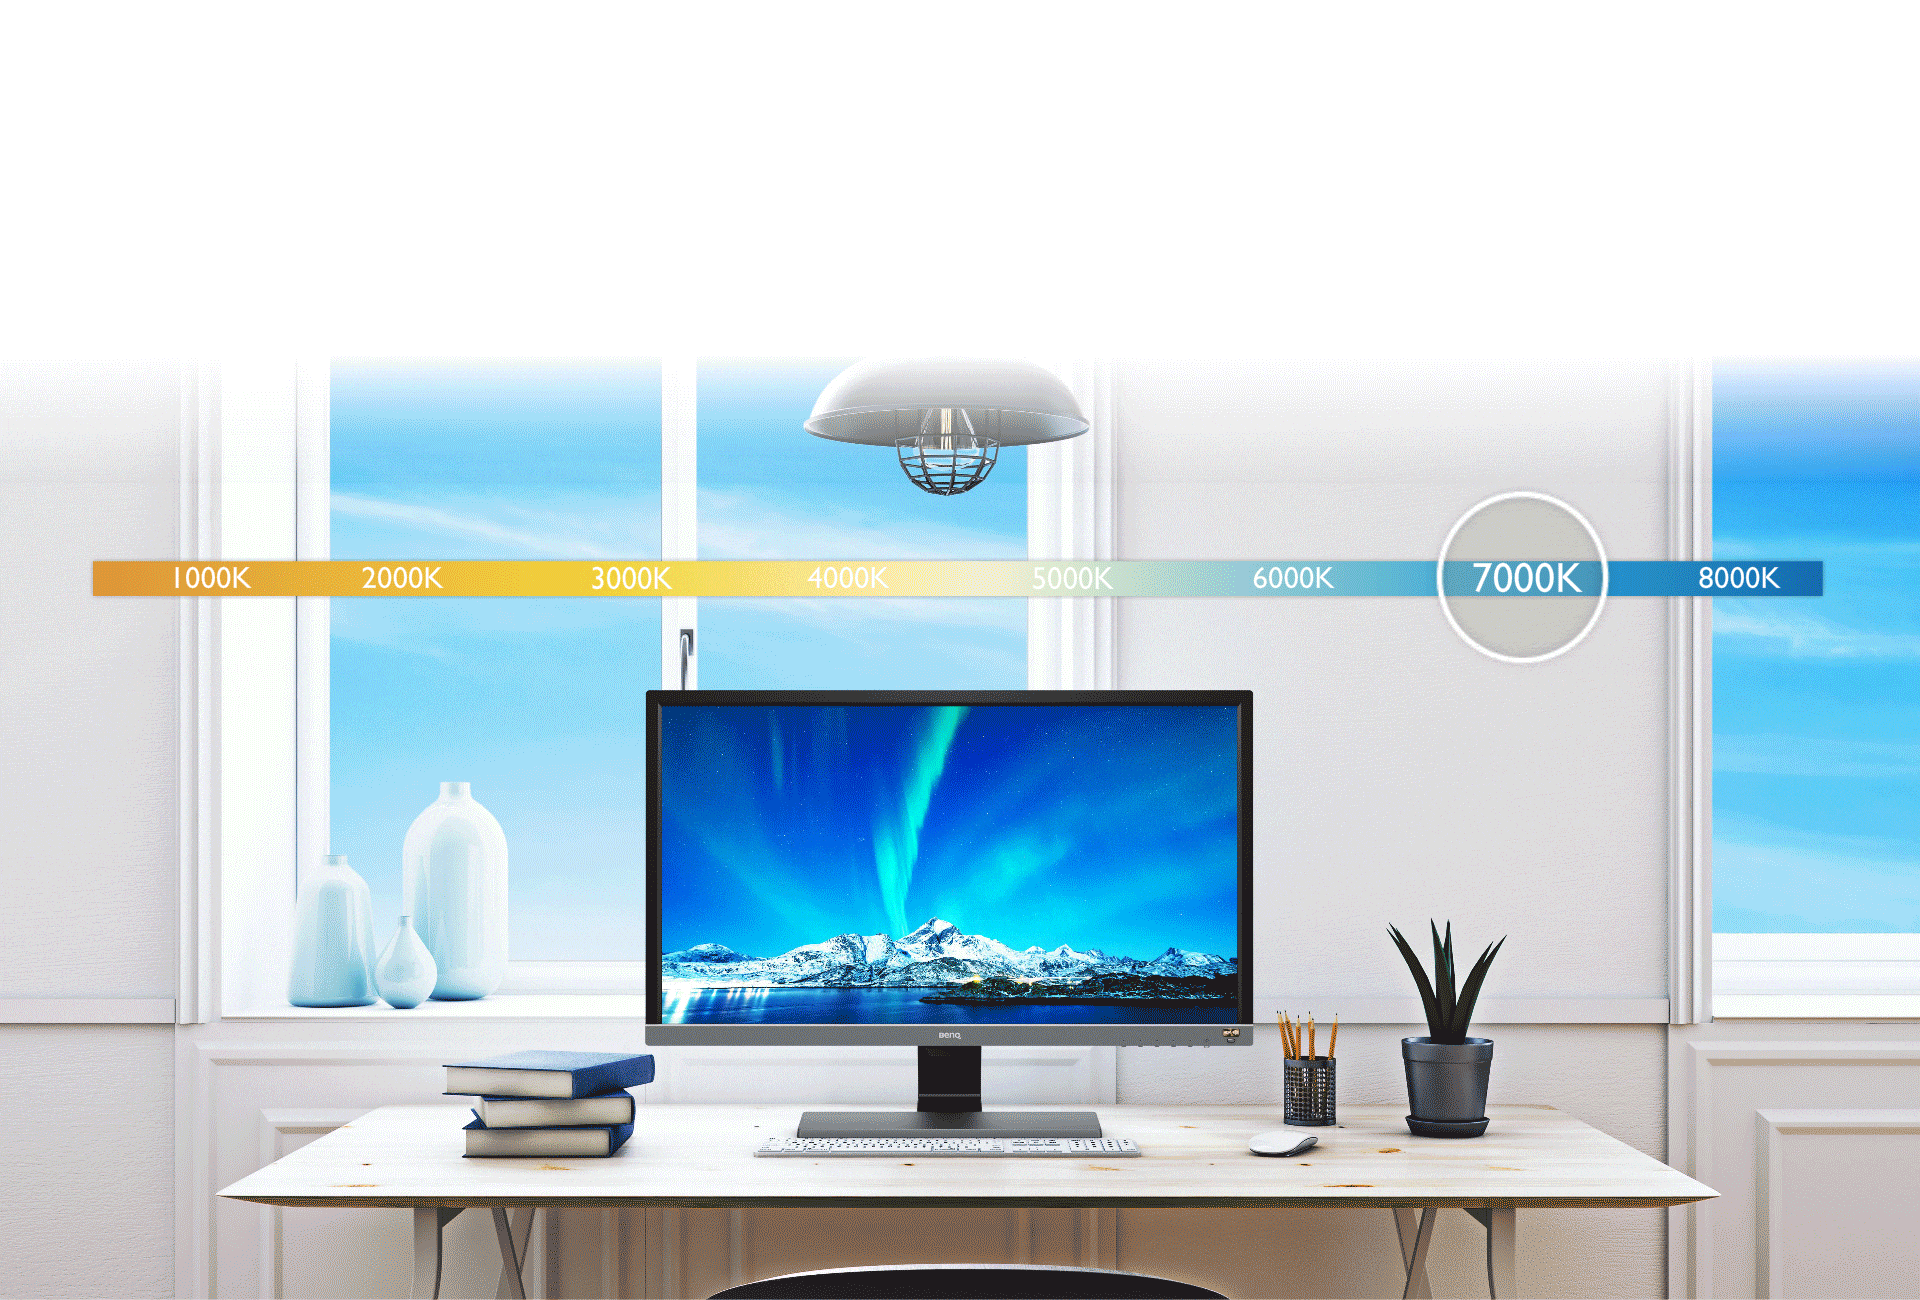 BenQ EX2780Q 144Hz gaming monitor can detect ambient light levels and the color temperature in your viewing environment, automatically adjusting on-screen brightness and color temperature to fit your surroundings.